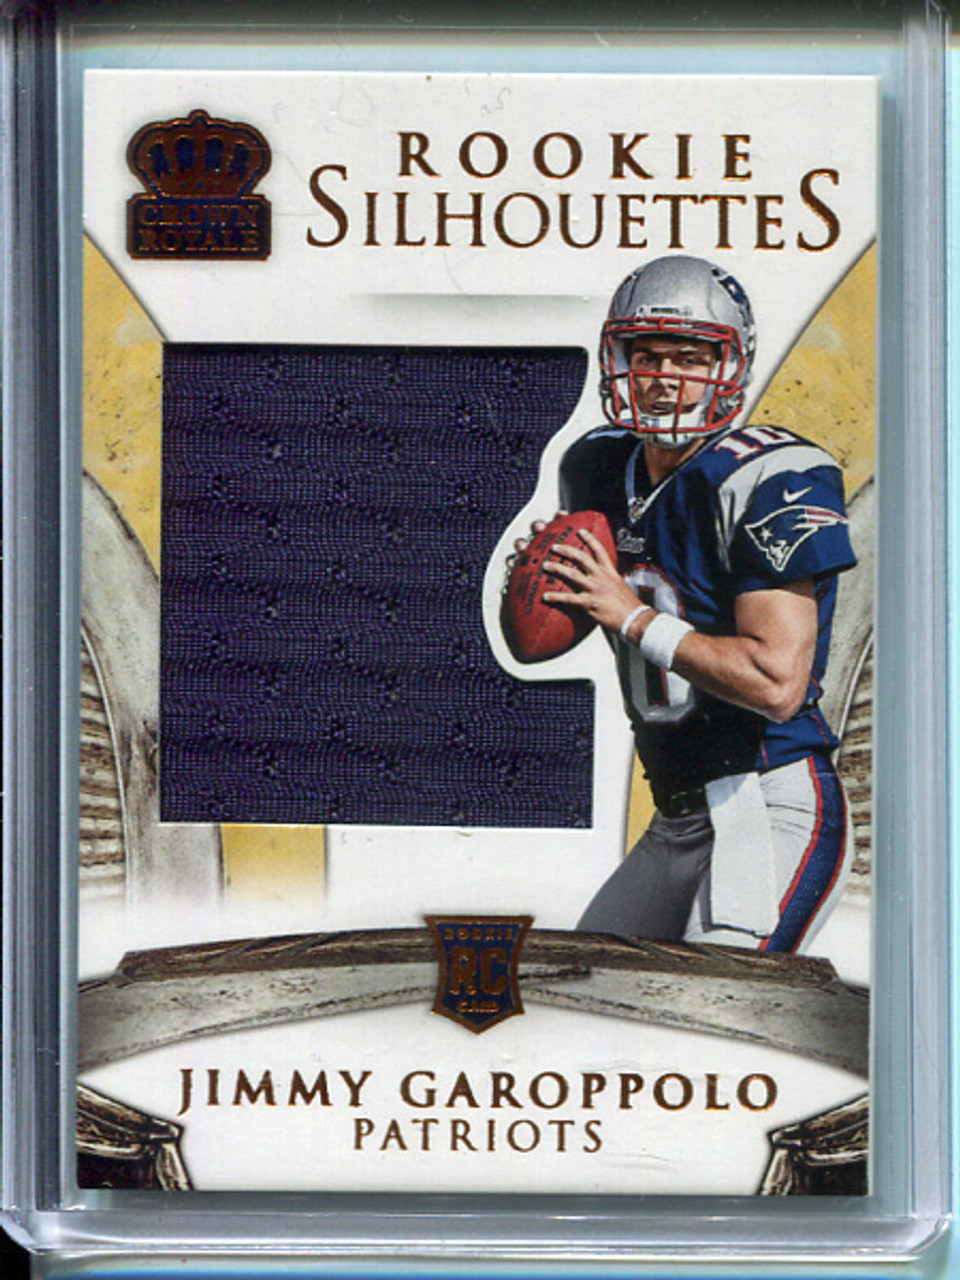 Jimmy Garoppolo 2014 Crown Royale #220 Rookie Silhouettes (#010/199)